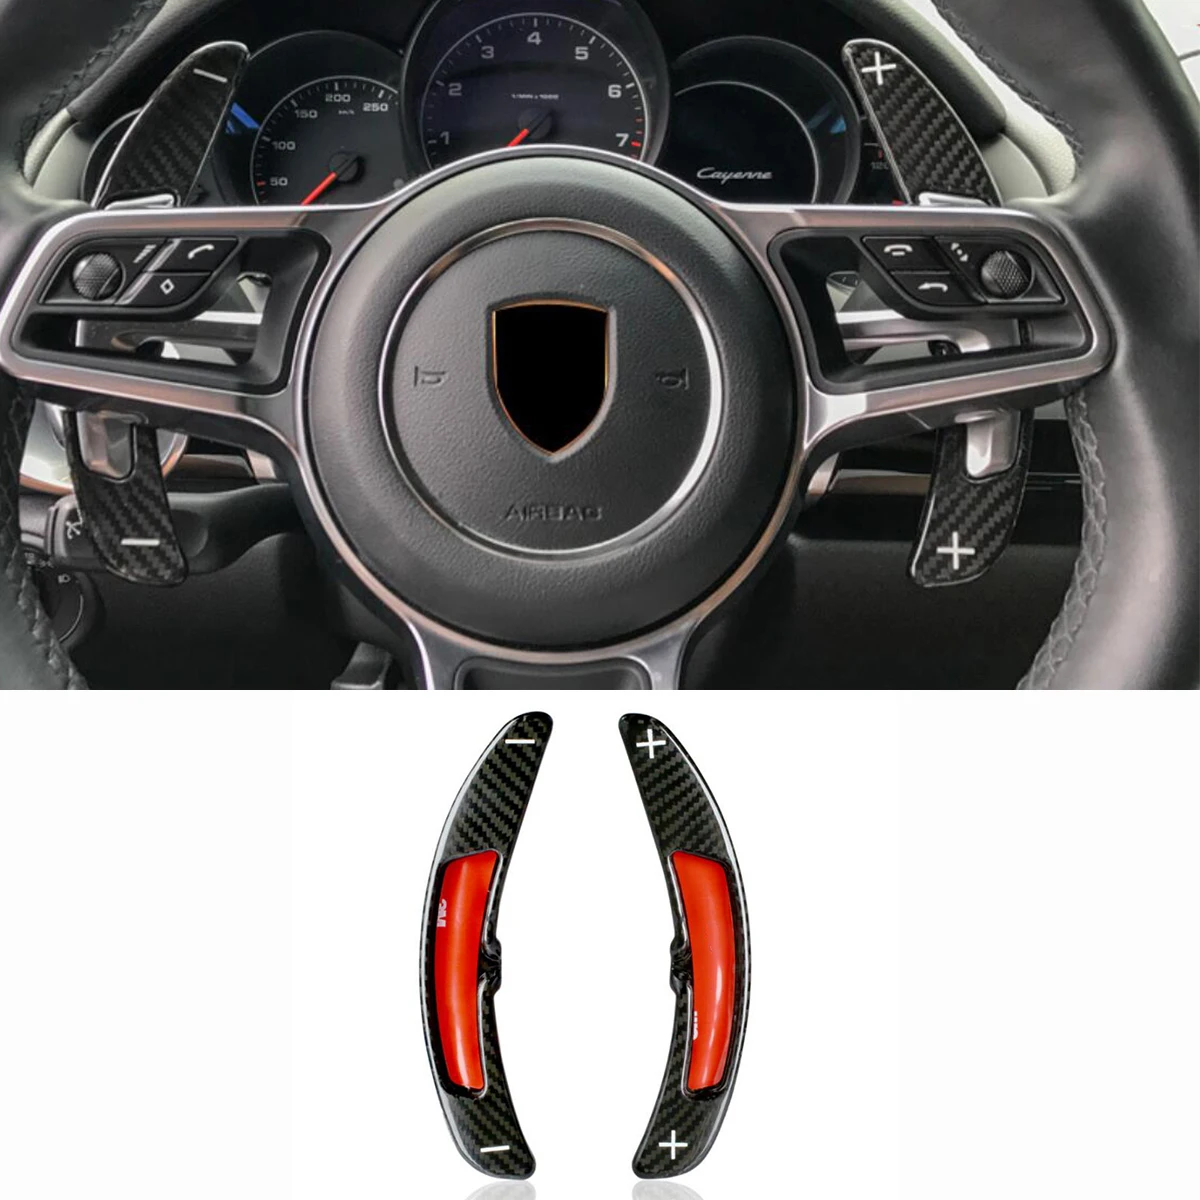 

2Pcs Real Carbon Fiber Car Steering Wheel Shift Paddle For Porsche Panamera Cayenne 911 Boxster Macan 718 918